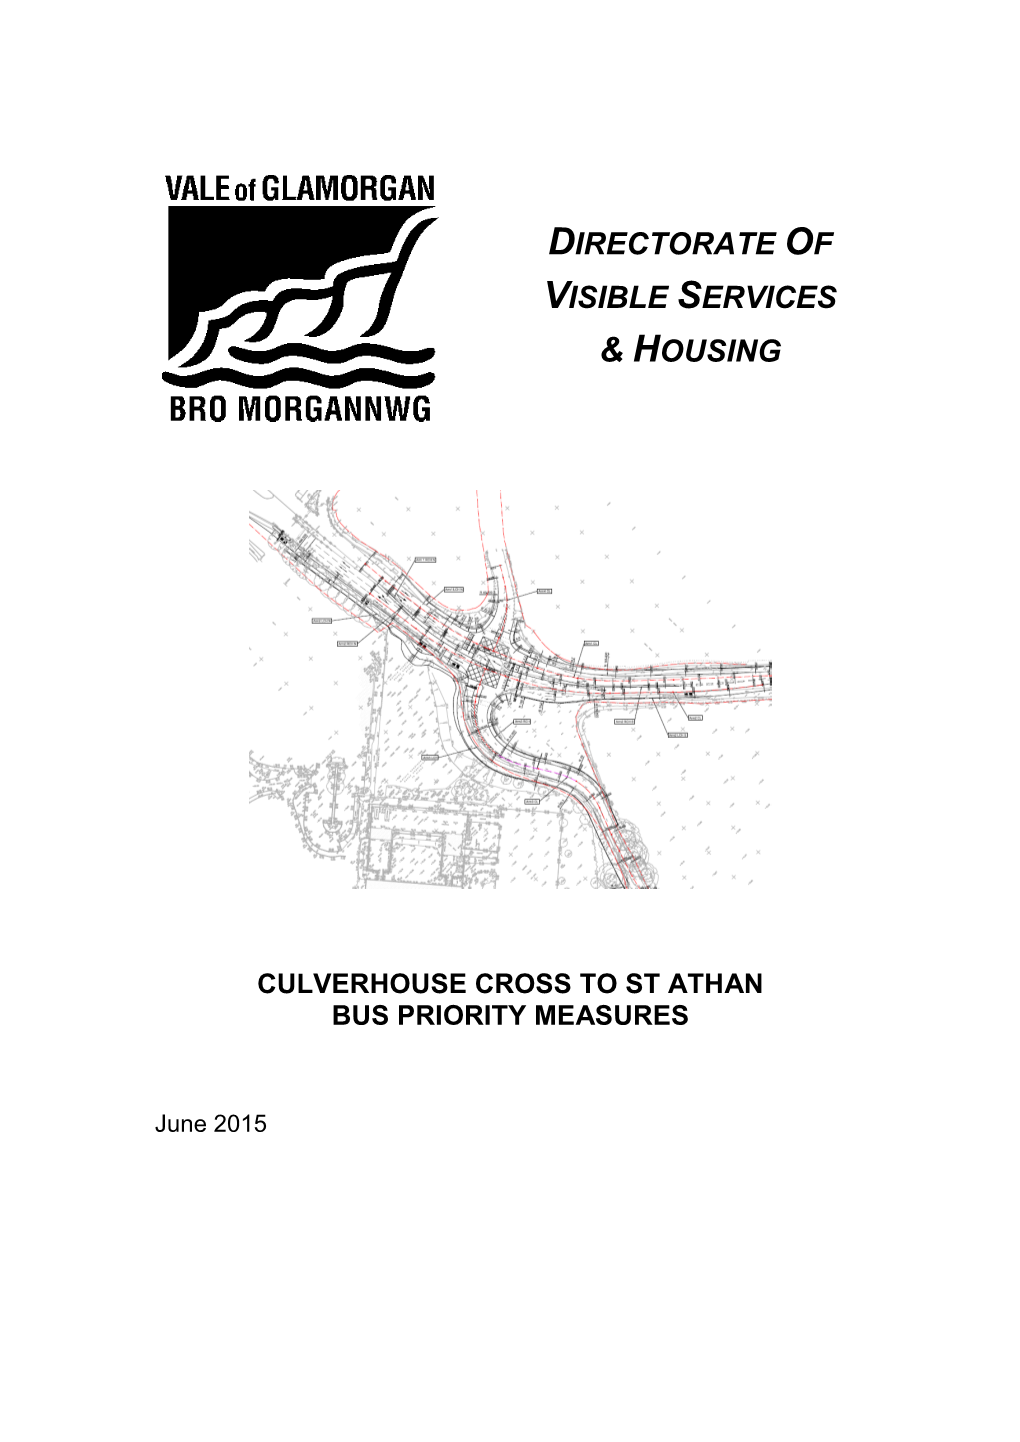 Culverhouse Cross to St Athan Bus Priority Measures